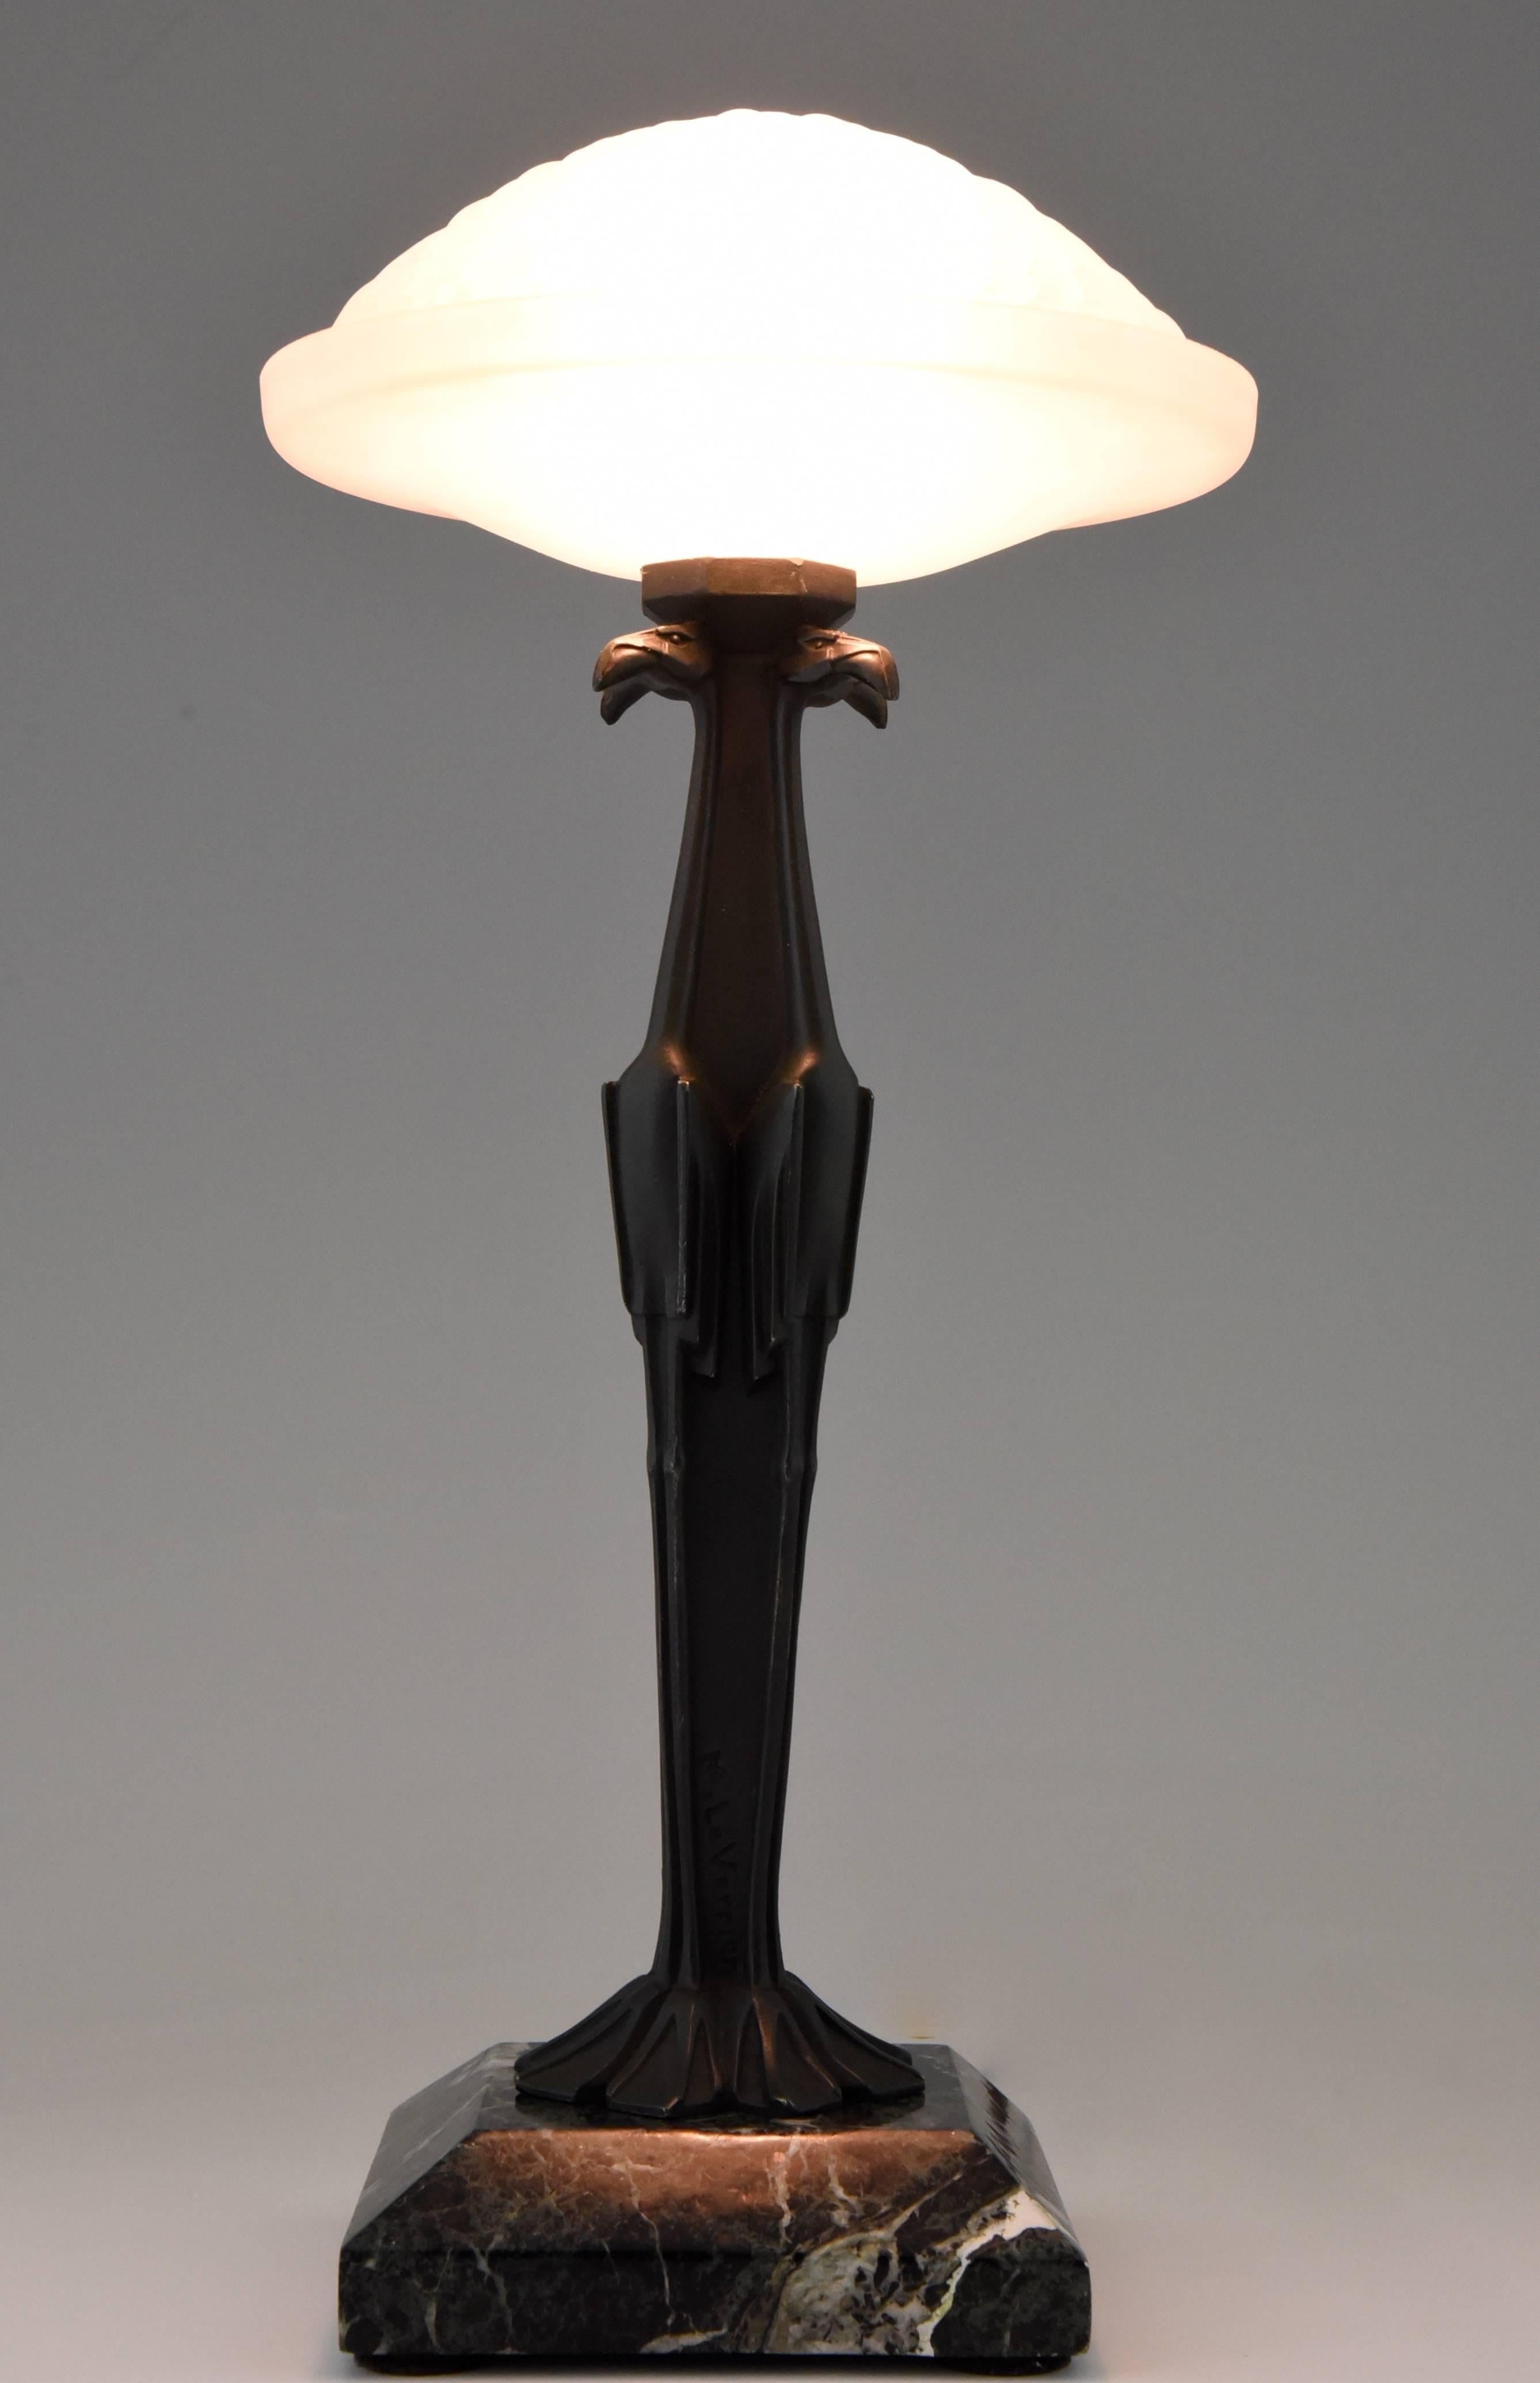 Art Deco flamingo table lamp with glass shade. 

Artist/Maker:
Max Le Verrier. 

Signature/Marks: 
M. Le Verrier. 

Style:
Art Deco.

Date:
1930.

Material: 
Dark green patinated metal.
Dark green marble base.

Origin: